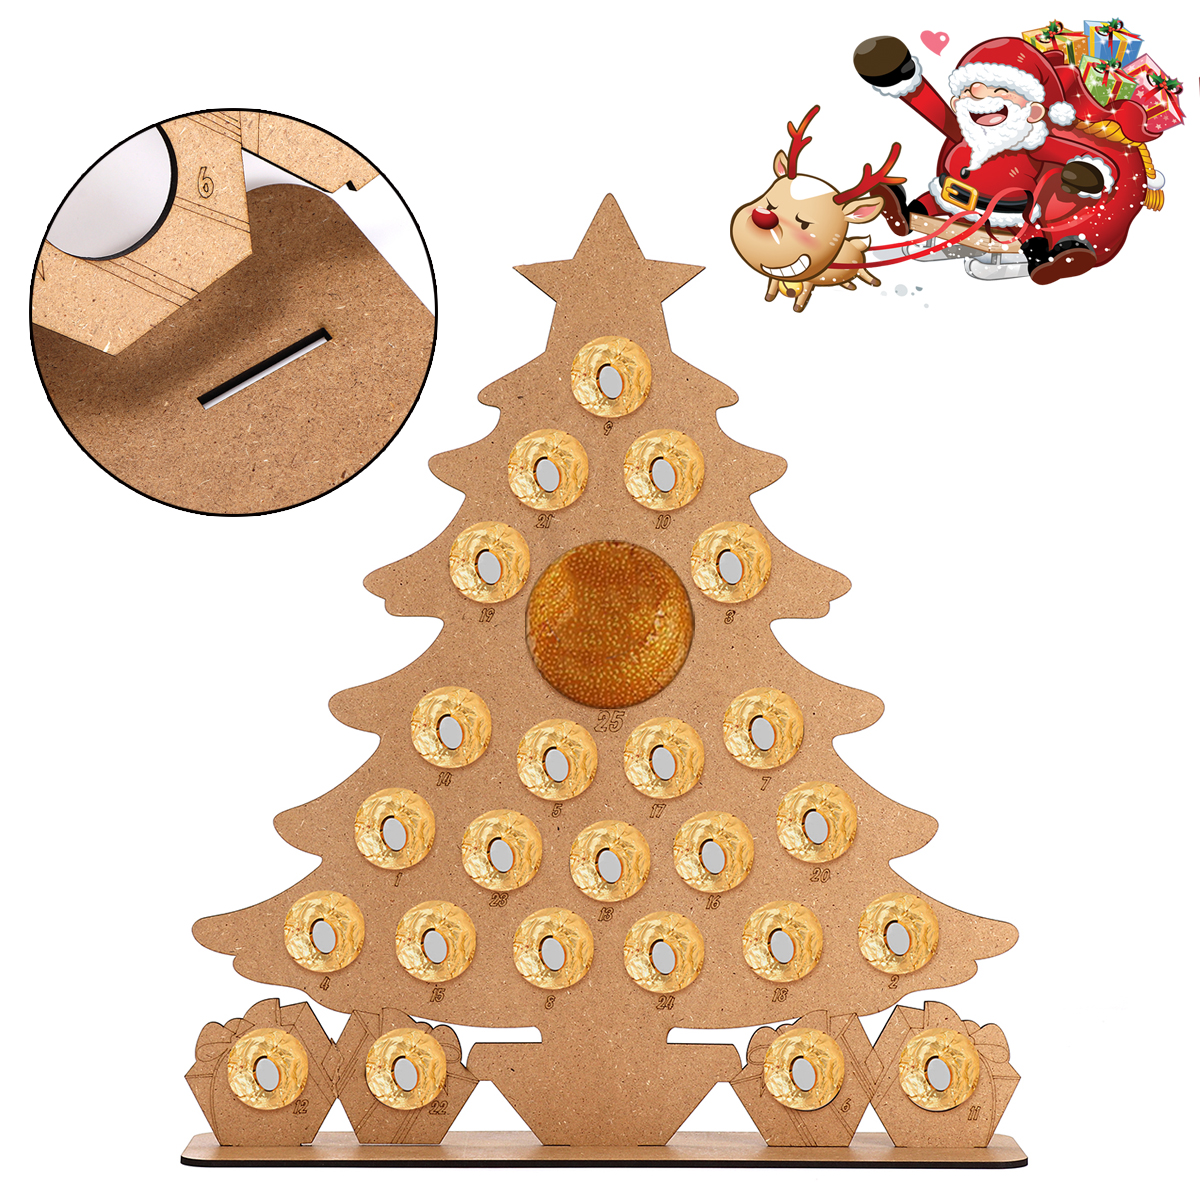 Wooden-Christmas-Advent-Calendar-Christmas-Tree-Decoration-Fits-25-Circular-Chocolates-Candy-Stand-R-1587861-1